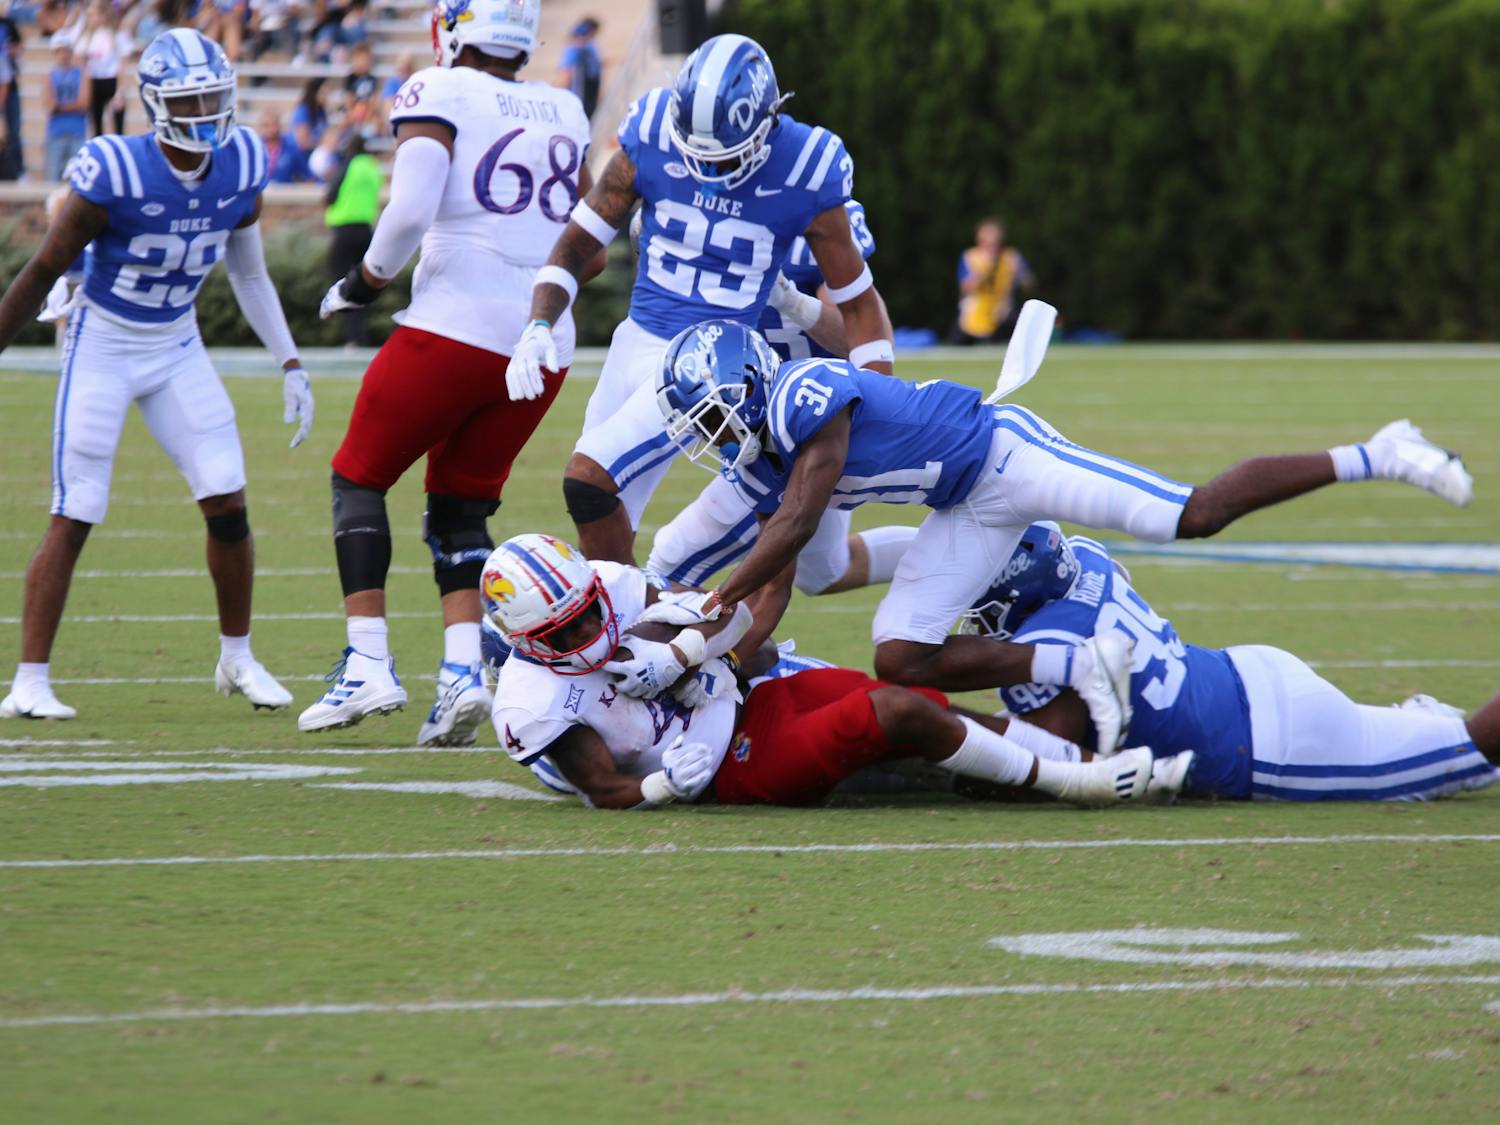 Duke's defense gave up four plays of 20 or more yards in the first half.